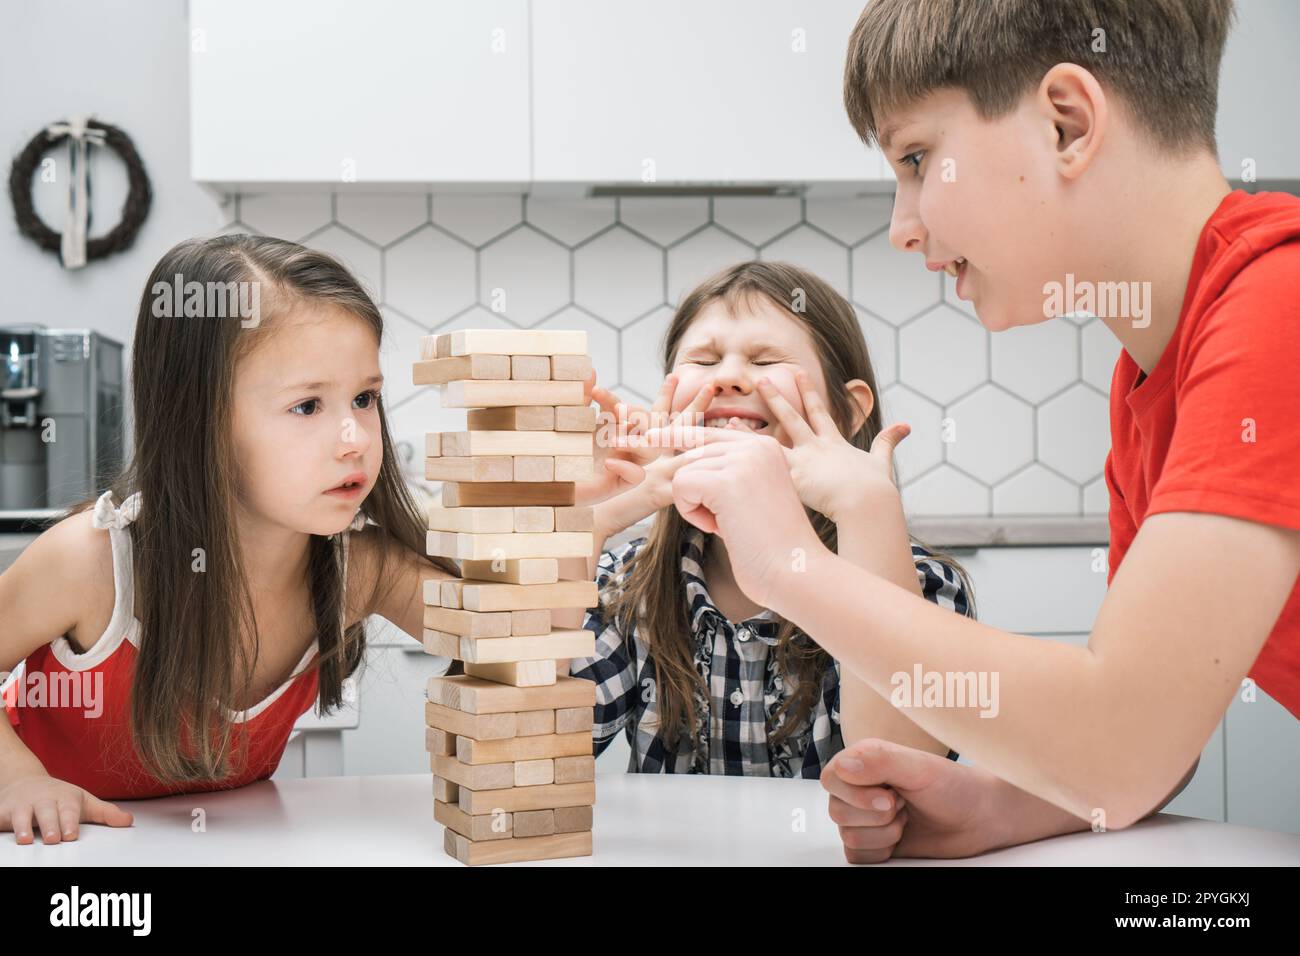 Nervous worried passionate kids playing board balance wooden brick tower game. Boy trying to move wooden cube out line Stock Photo